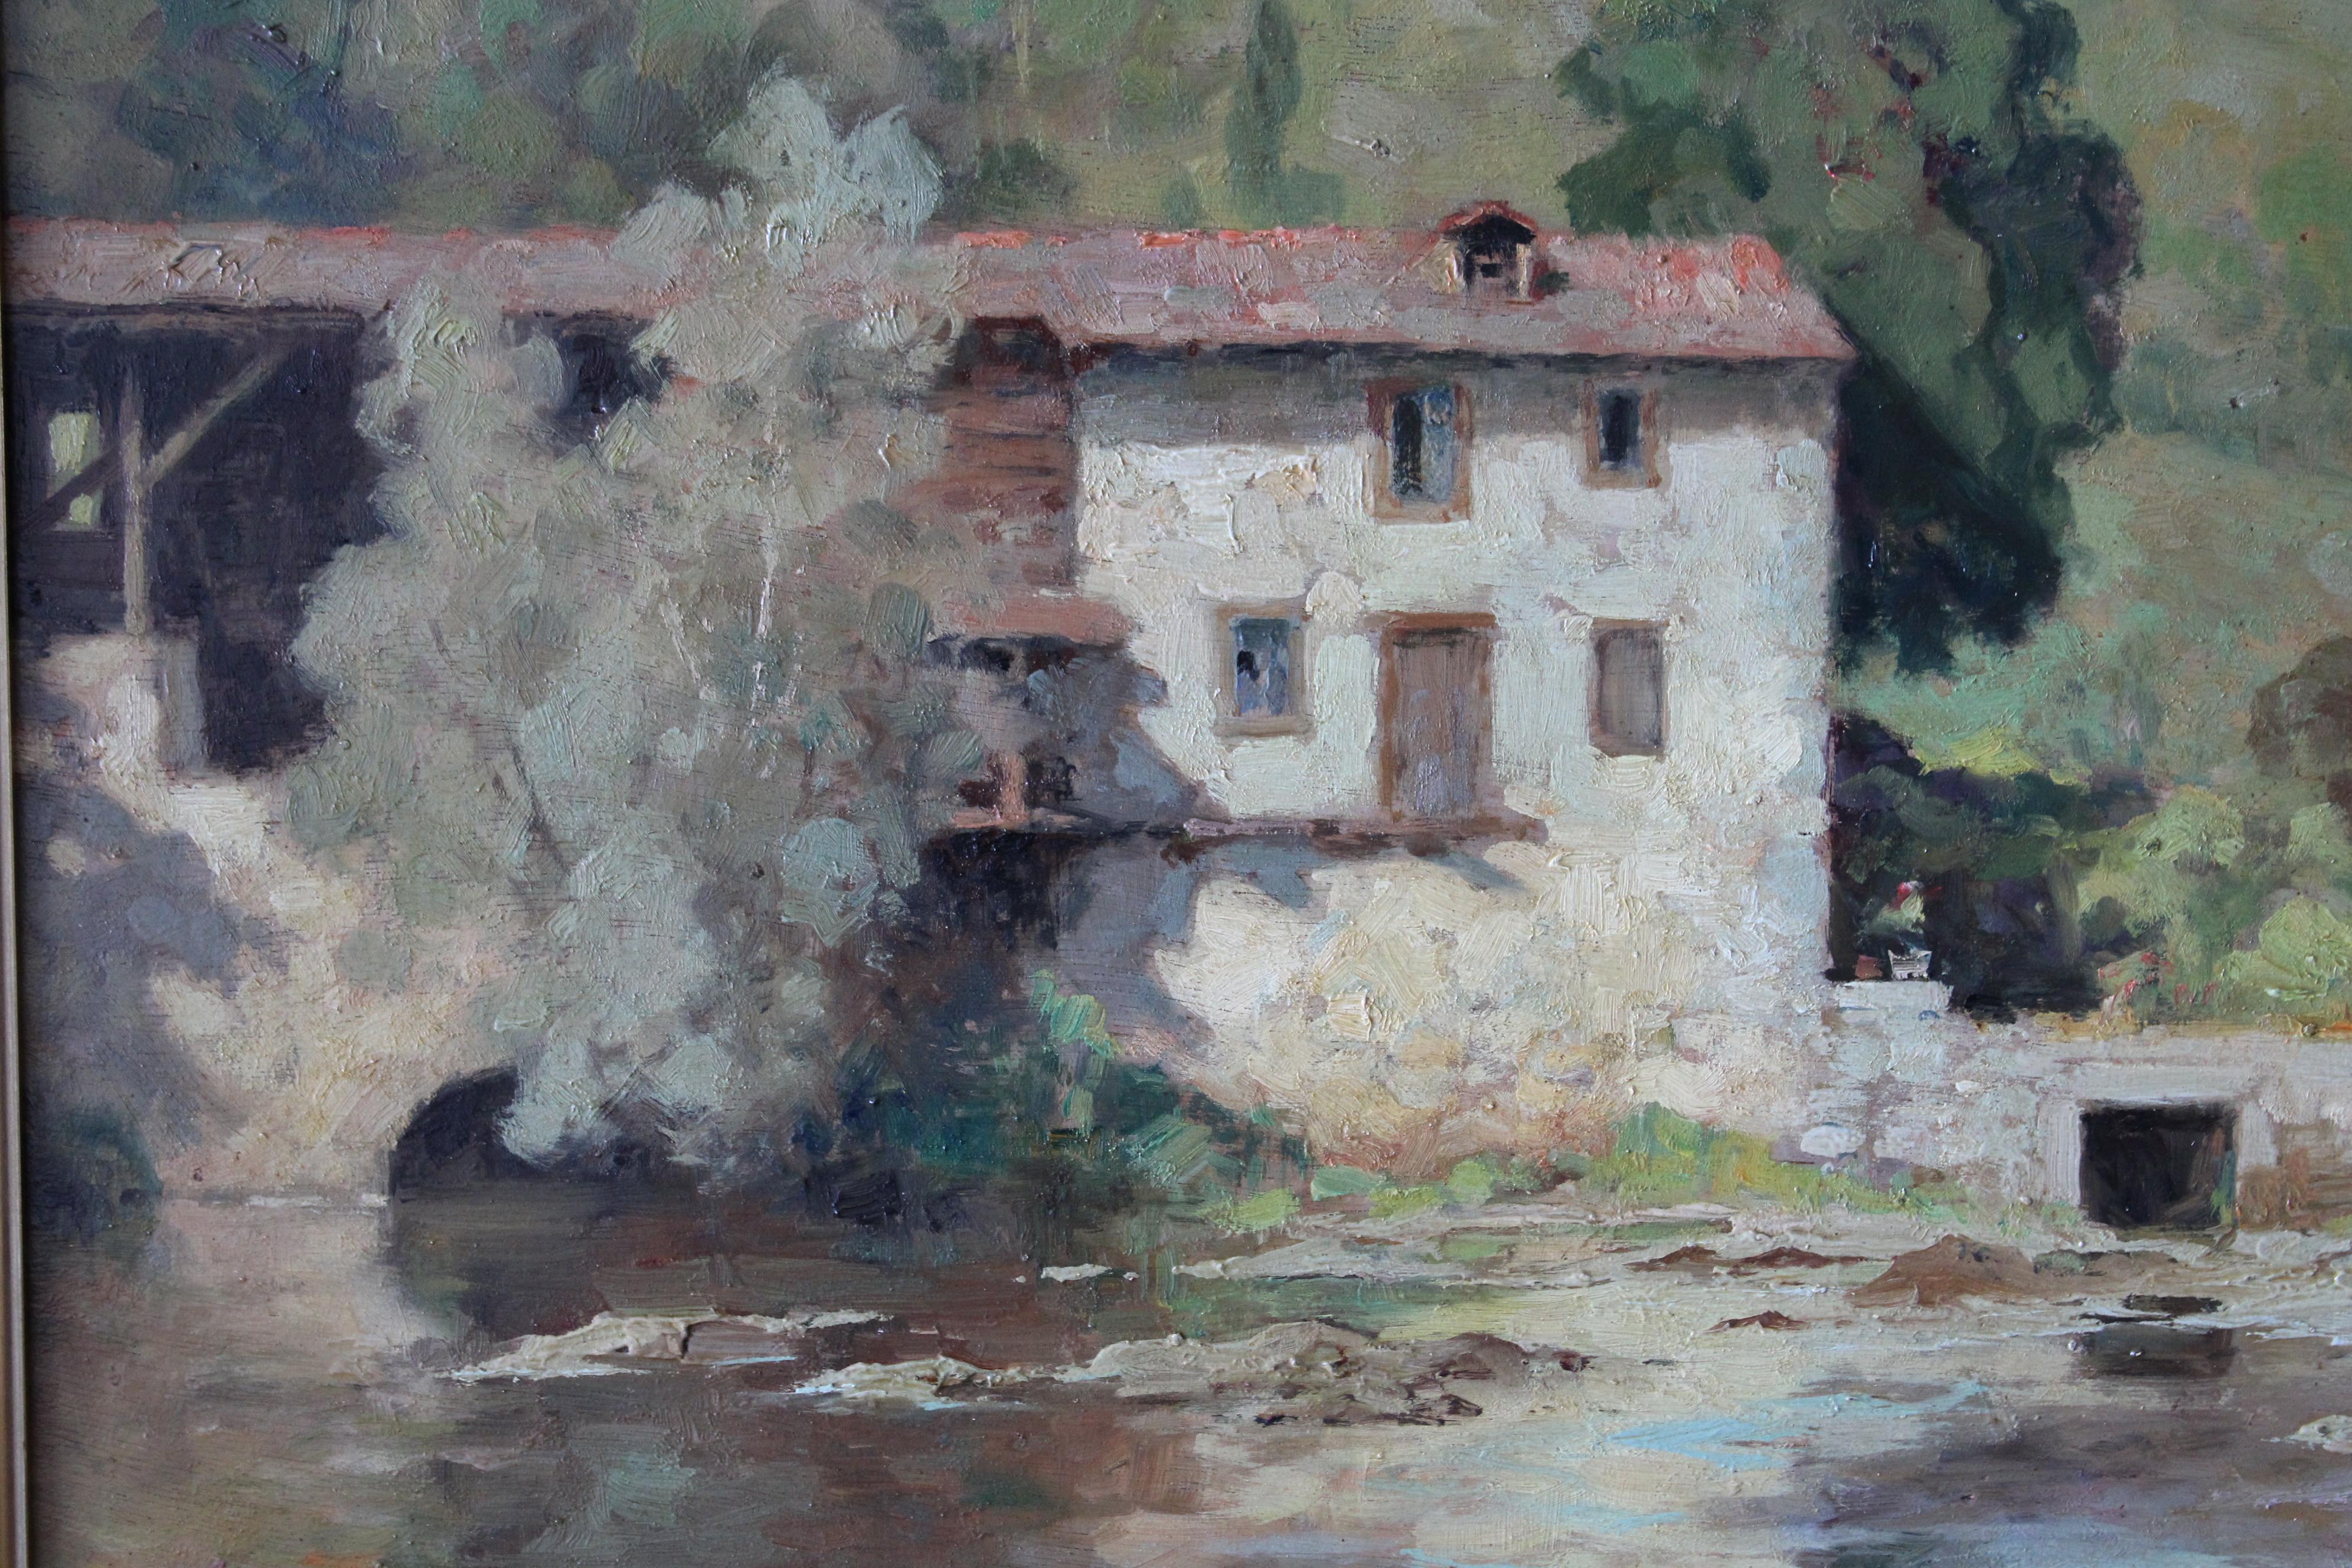 Vintage landscape oil painting on wood by French artist, Albert Regagnon.  A very charming, landscape/riverscape of a French mill in the Ariege region of France signed and dated 1935.  This is a calming riverscape with nature's muted tones of